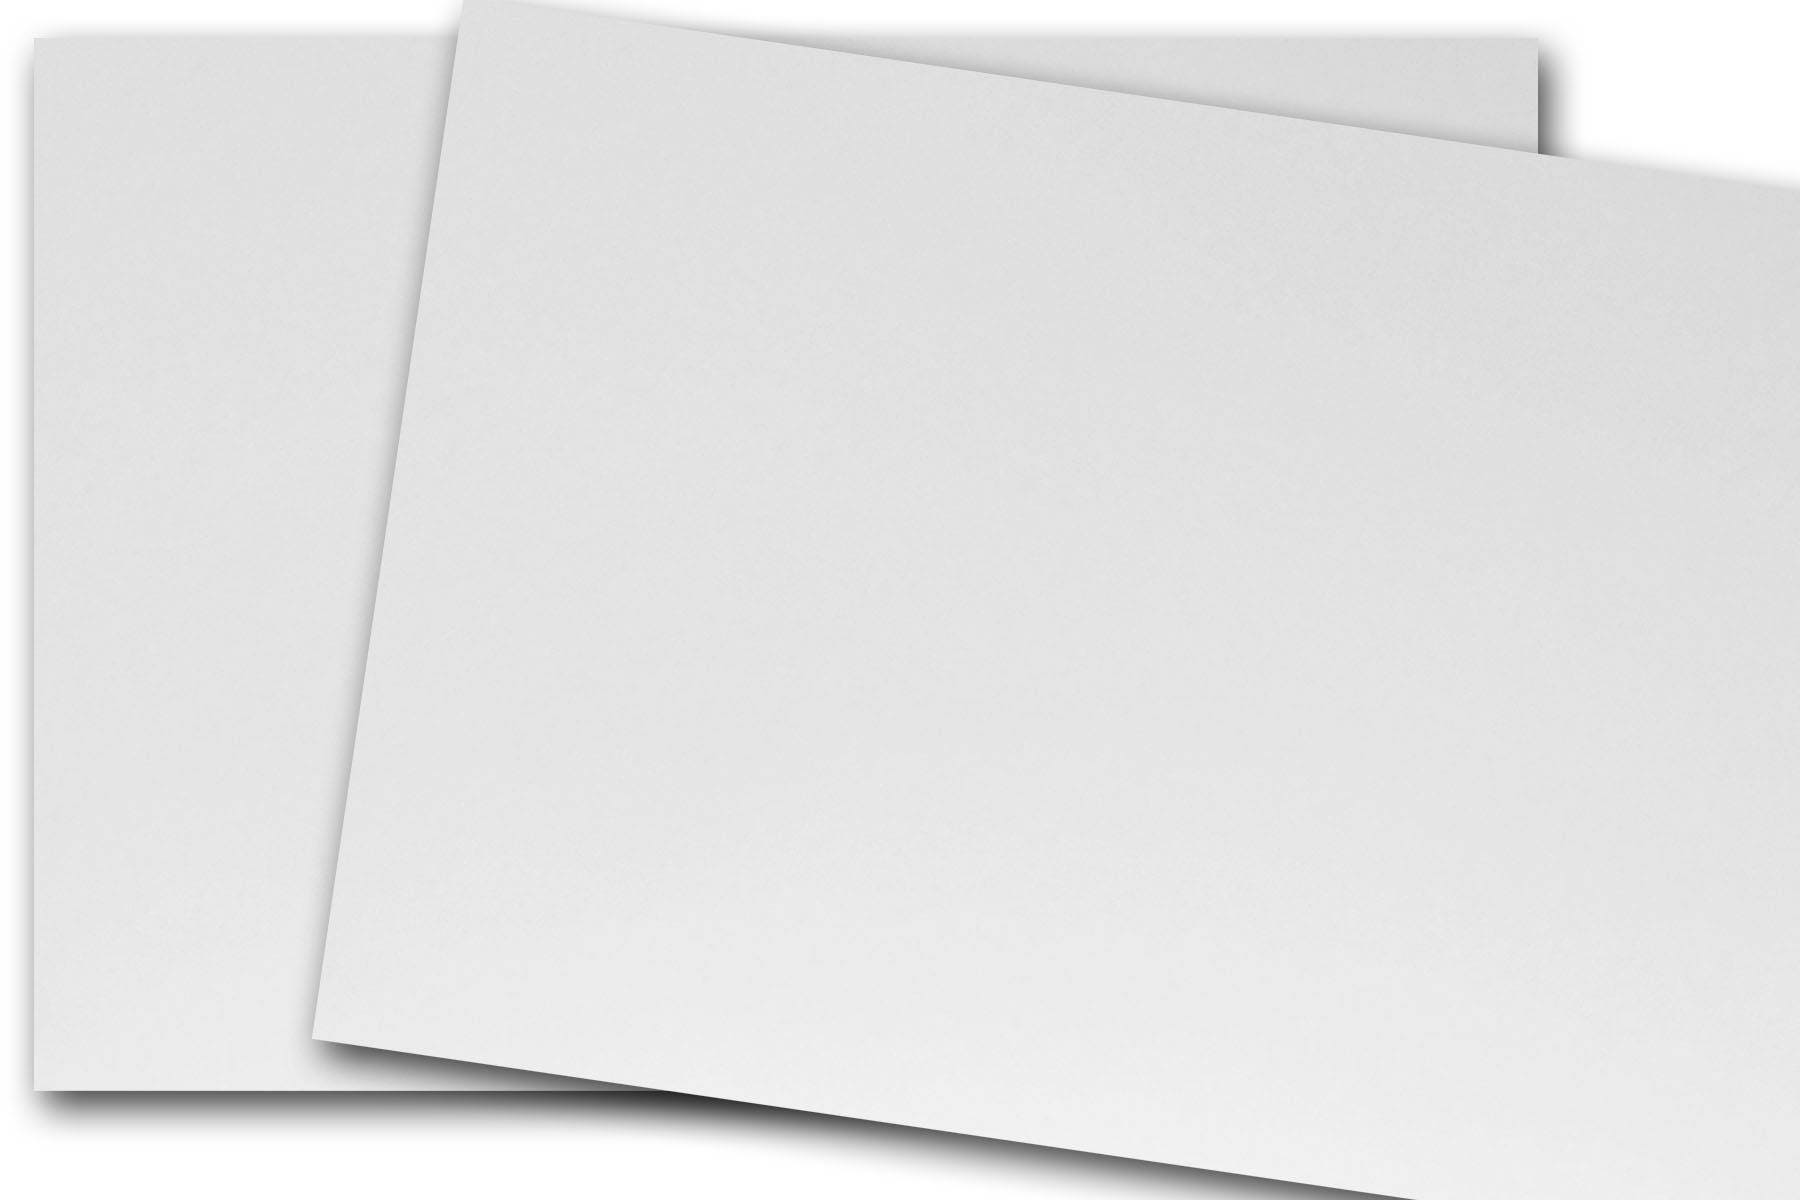 Neenah Classic CREST 130lb NATURAL WHITE Card Stock 8.5x11 25